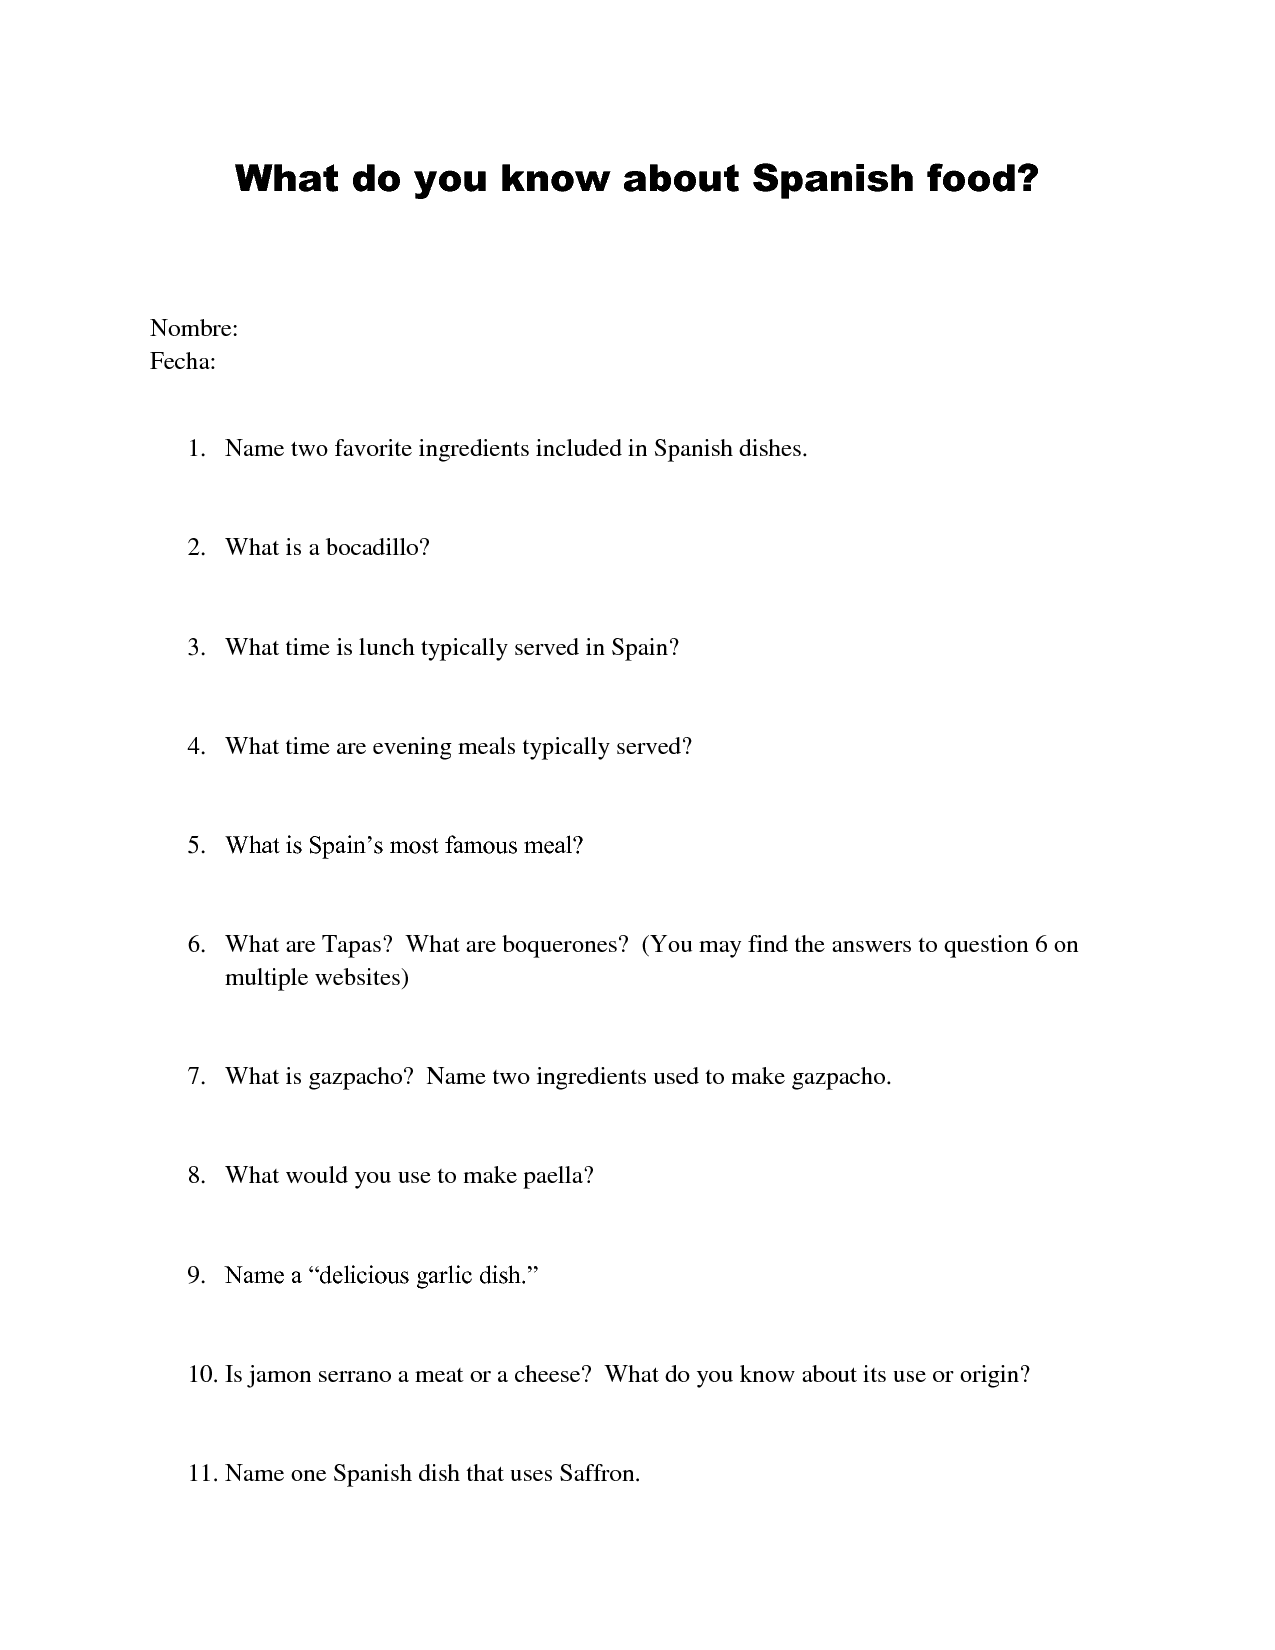 What Do You Know About Spanish Food Worksheet Image